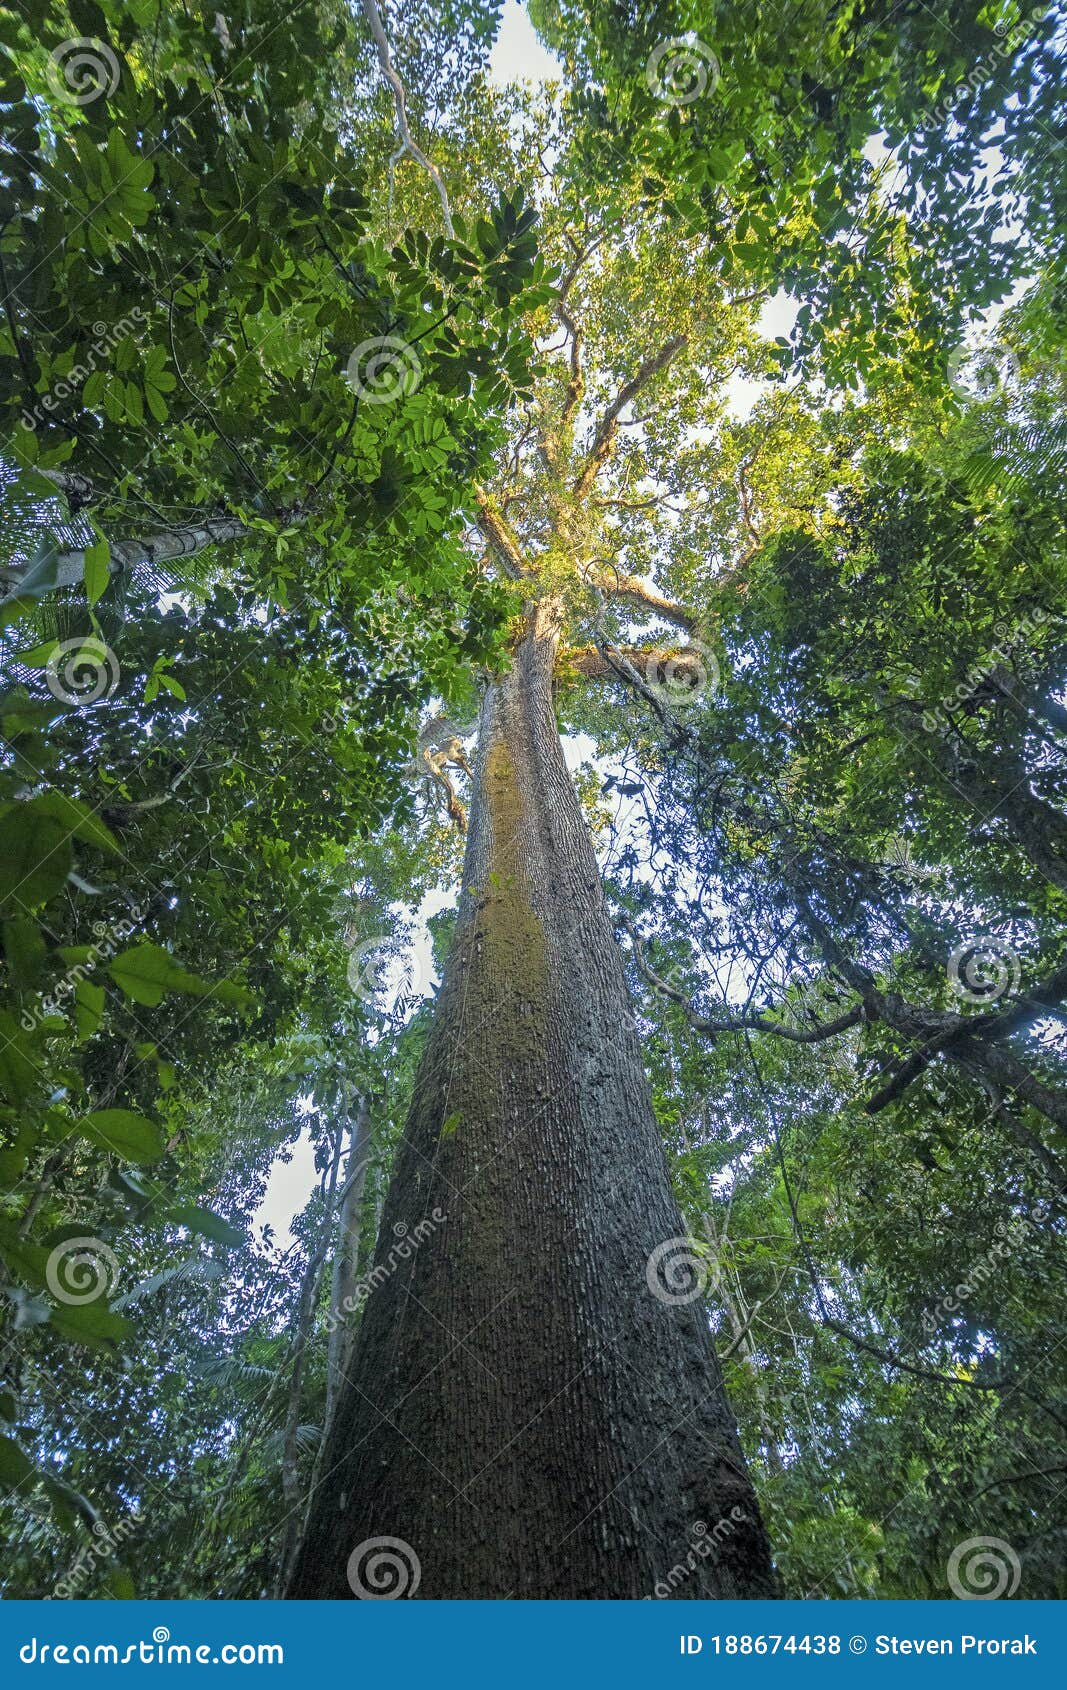 ancient brazil nut tree in the amazon